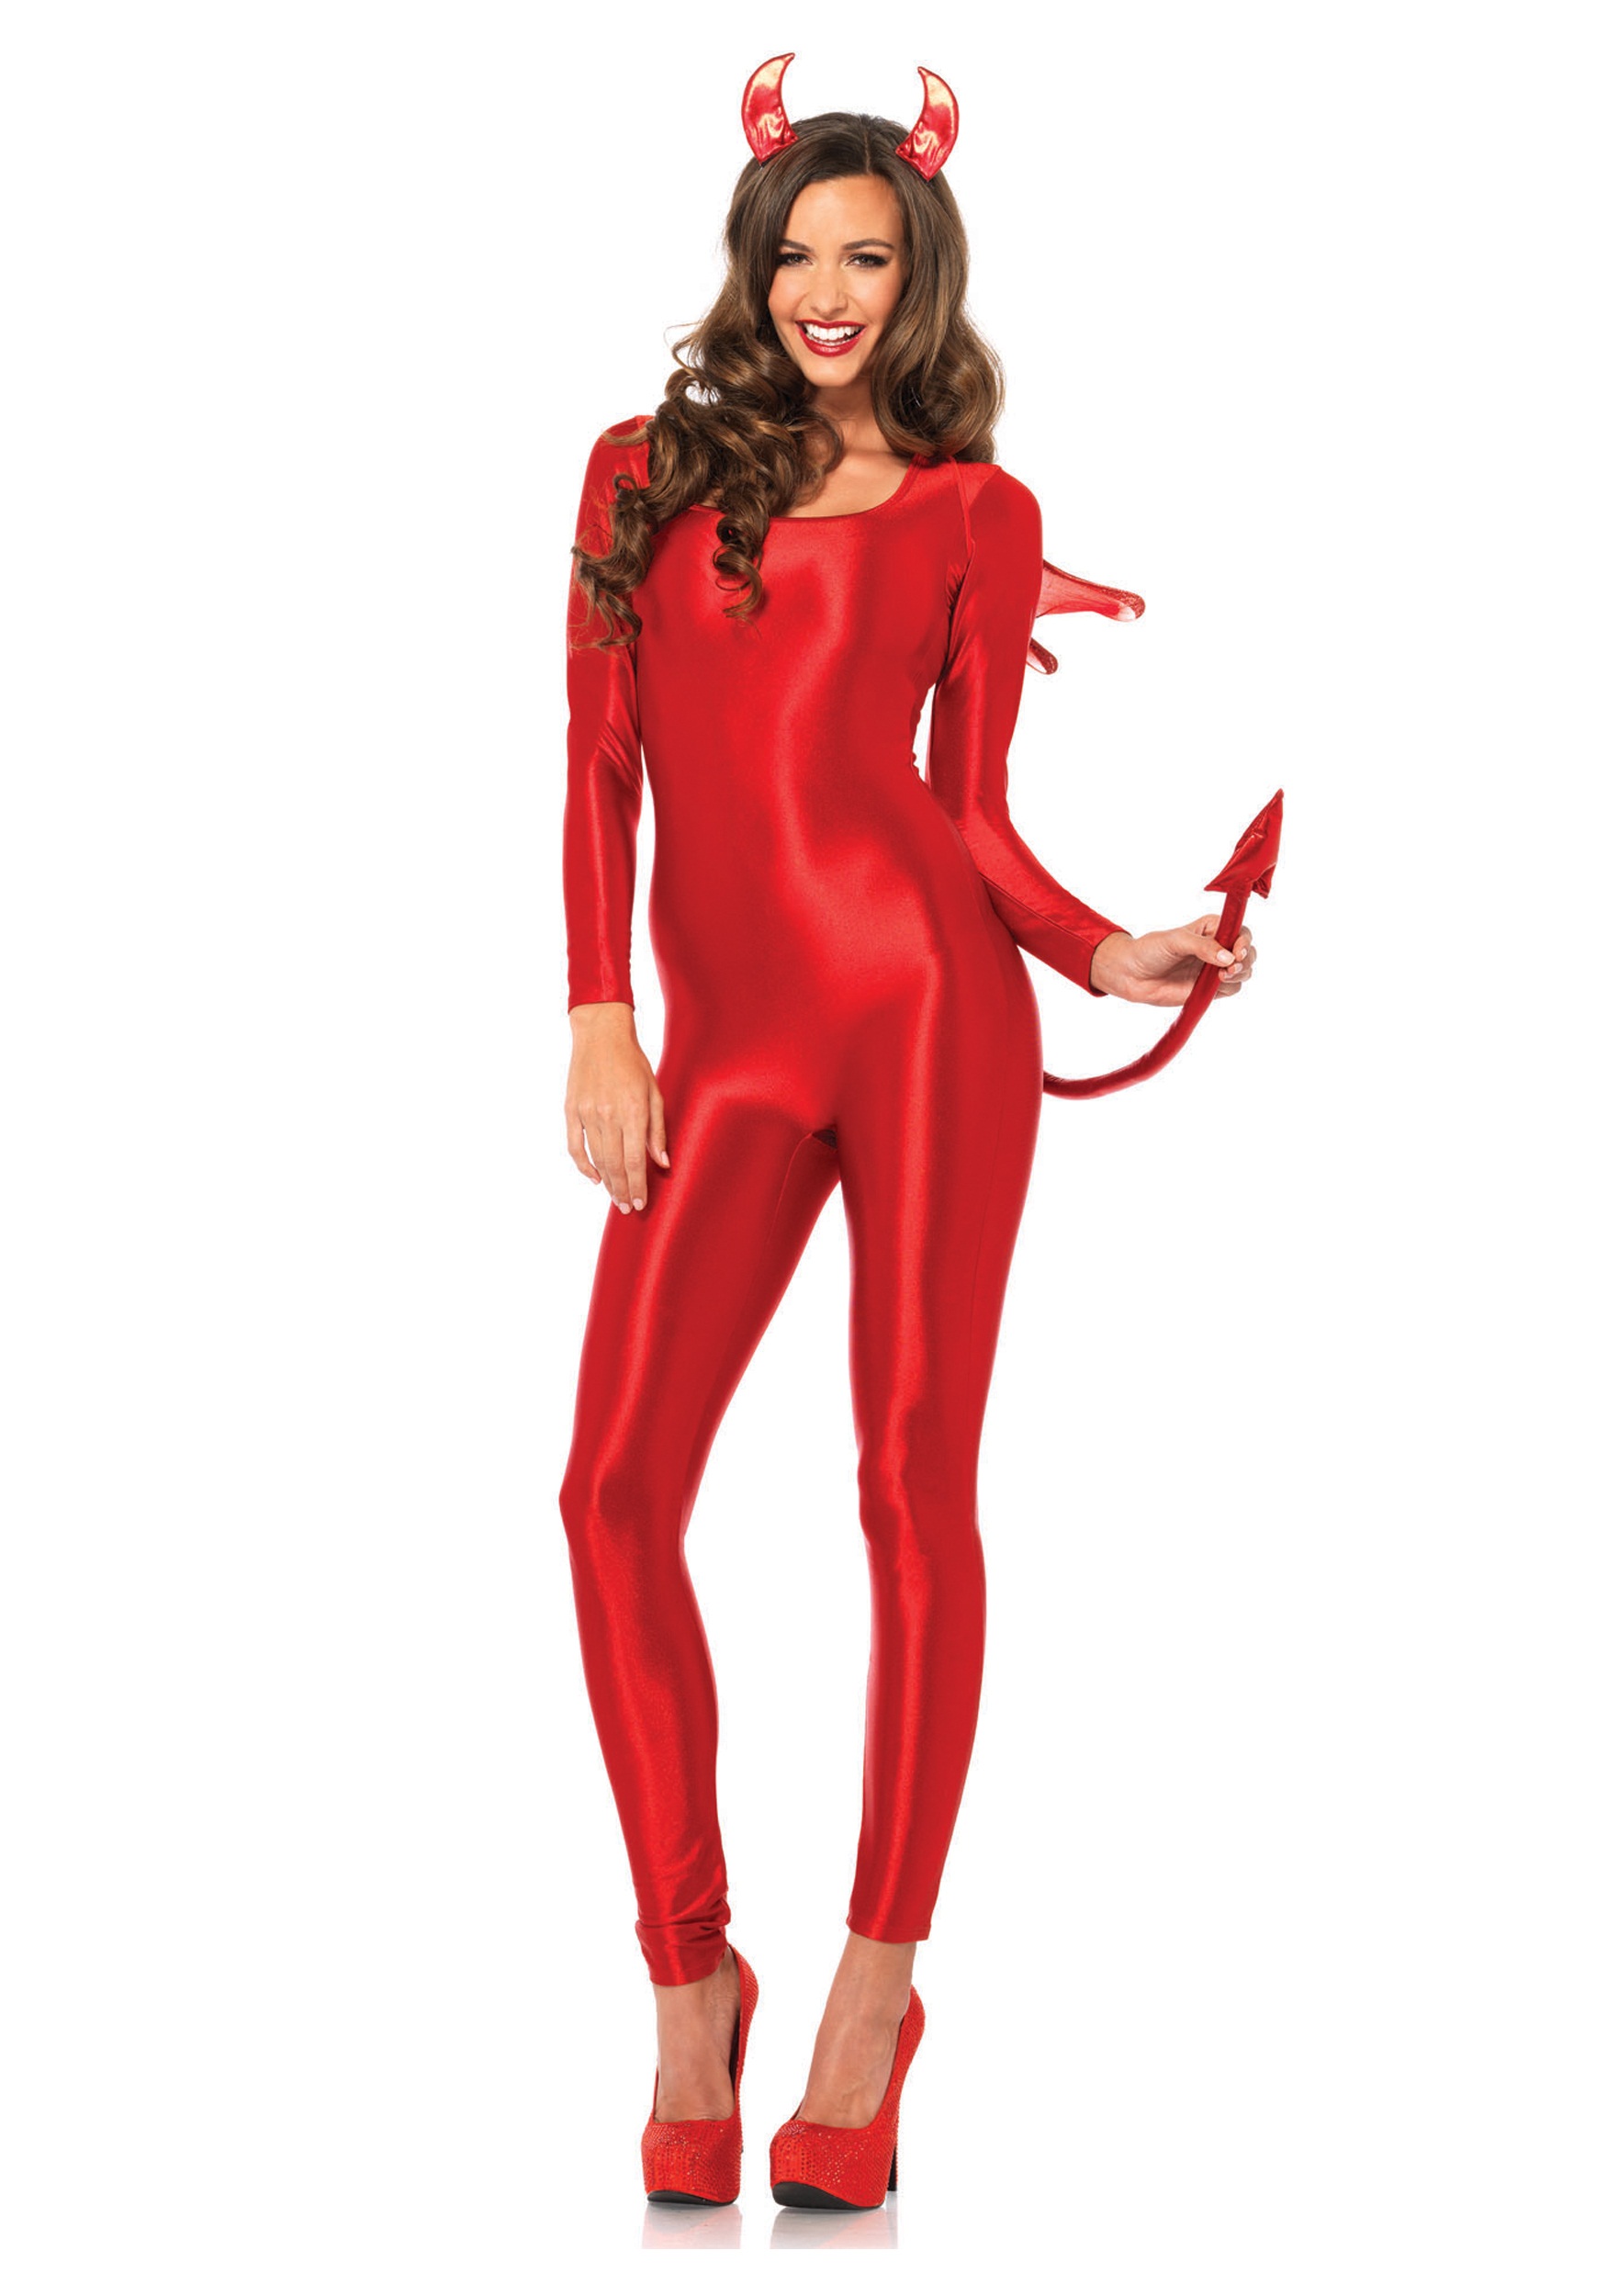 Women's Red Spandex Catsuit